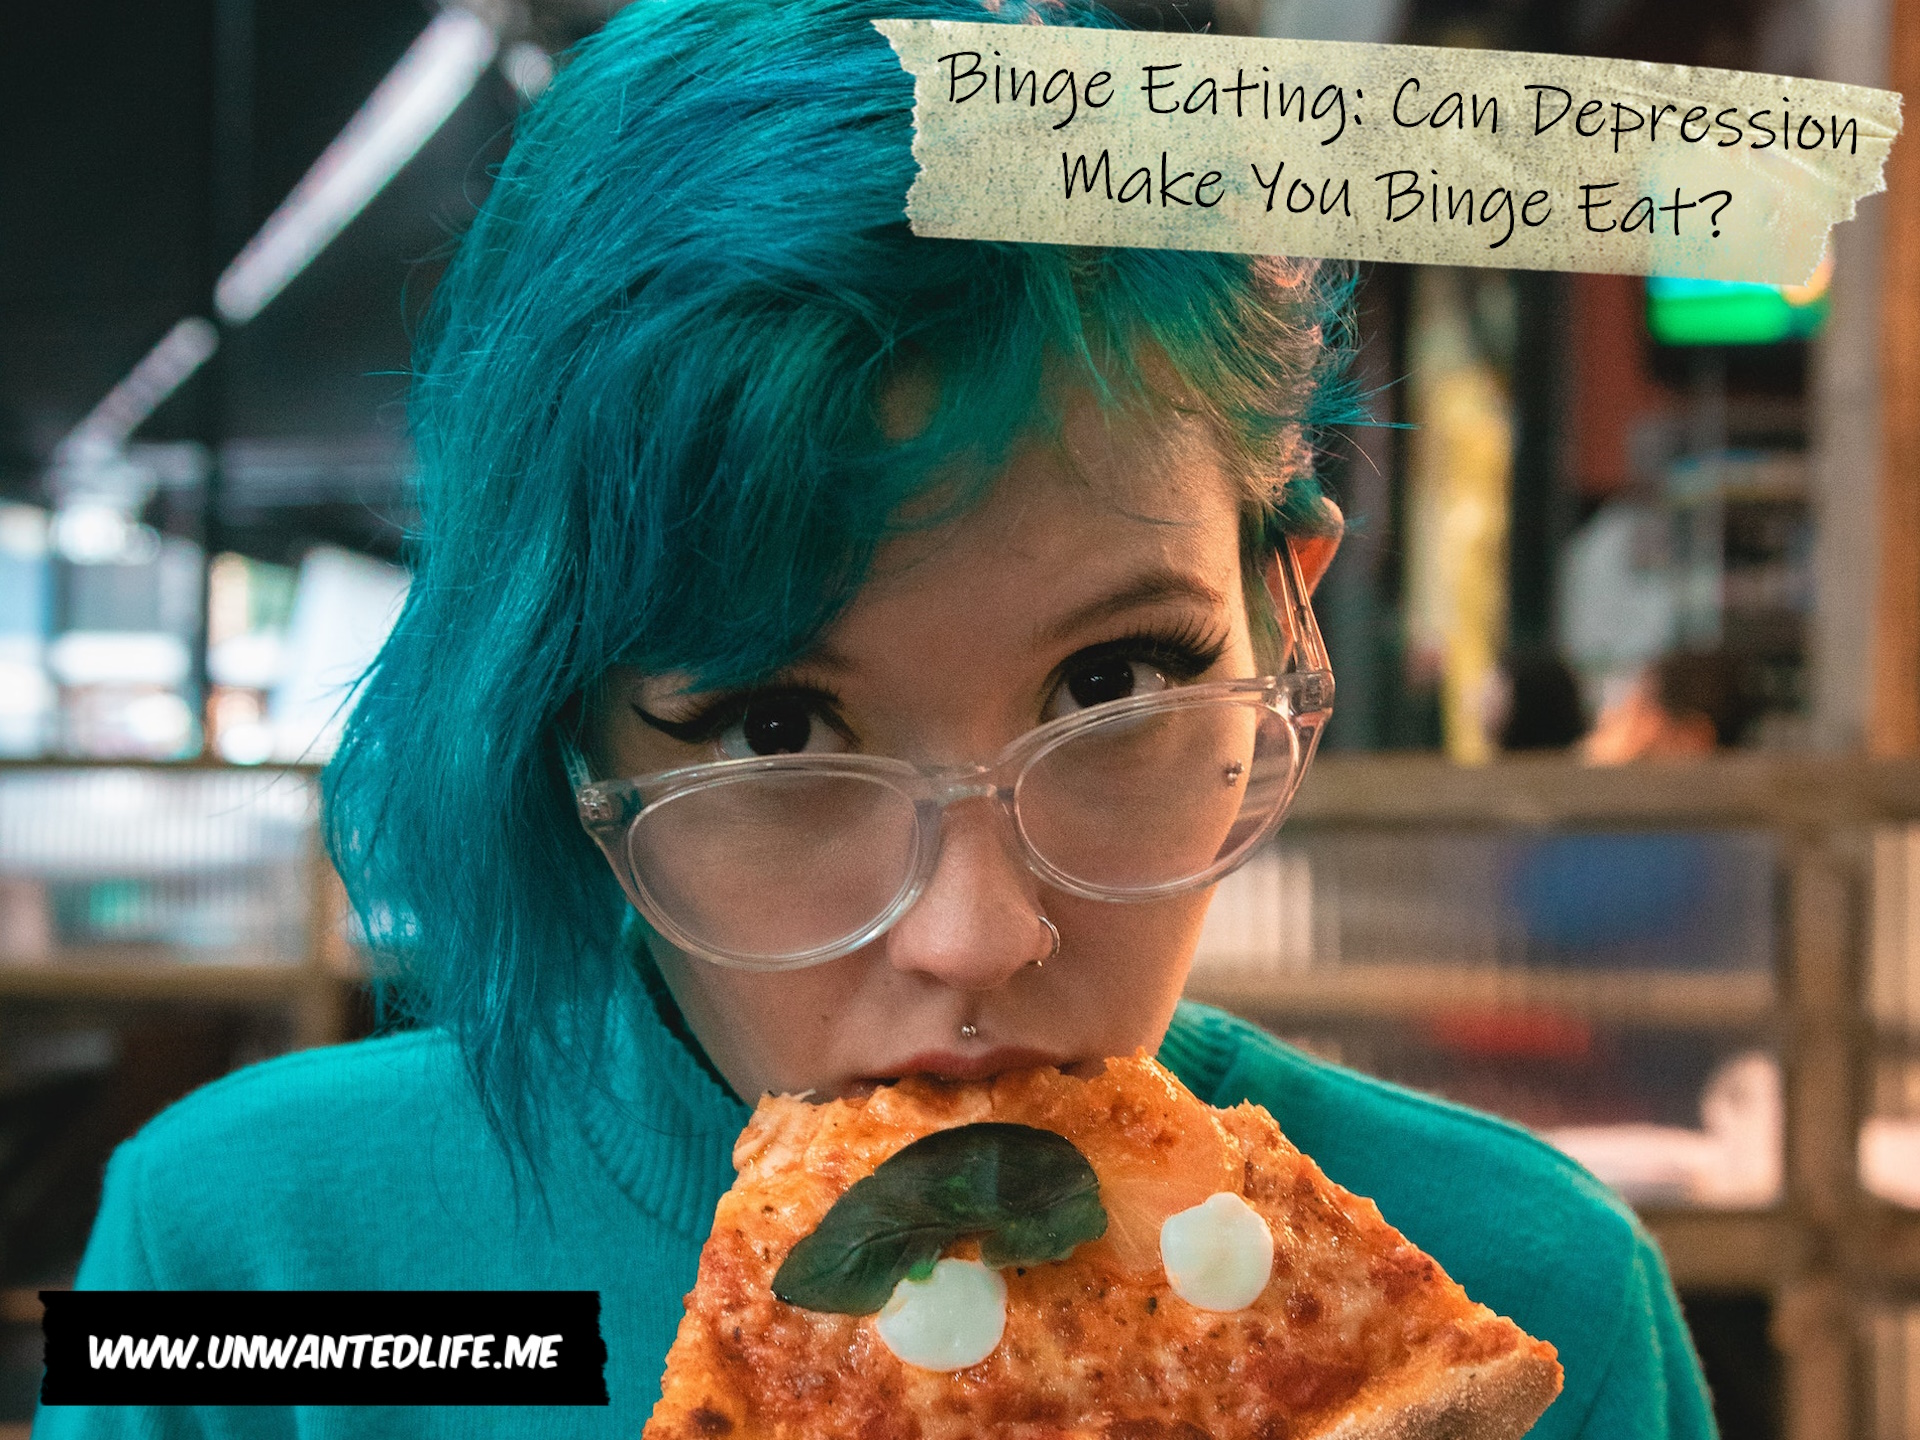 A photo of a White woman with blue hair and clear framed glasses eating a slice of pizza to represent the topic of the article - Binge Eating: Can Depression Make You Binge Eat?